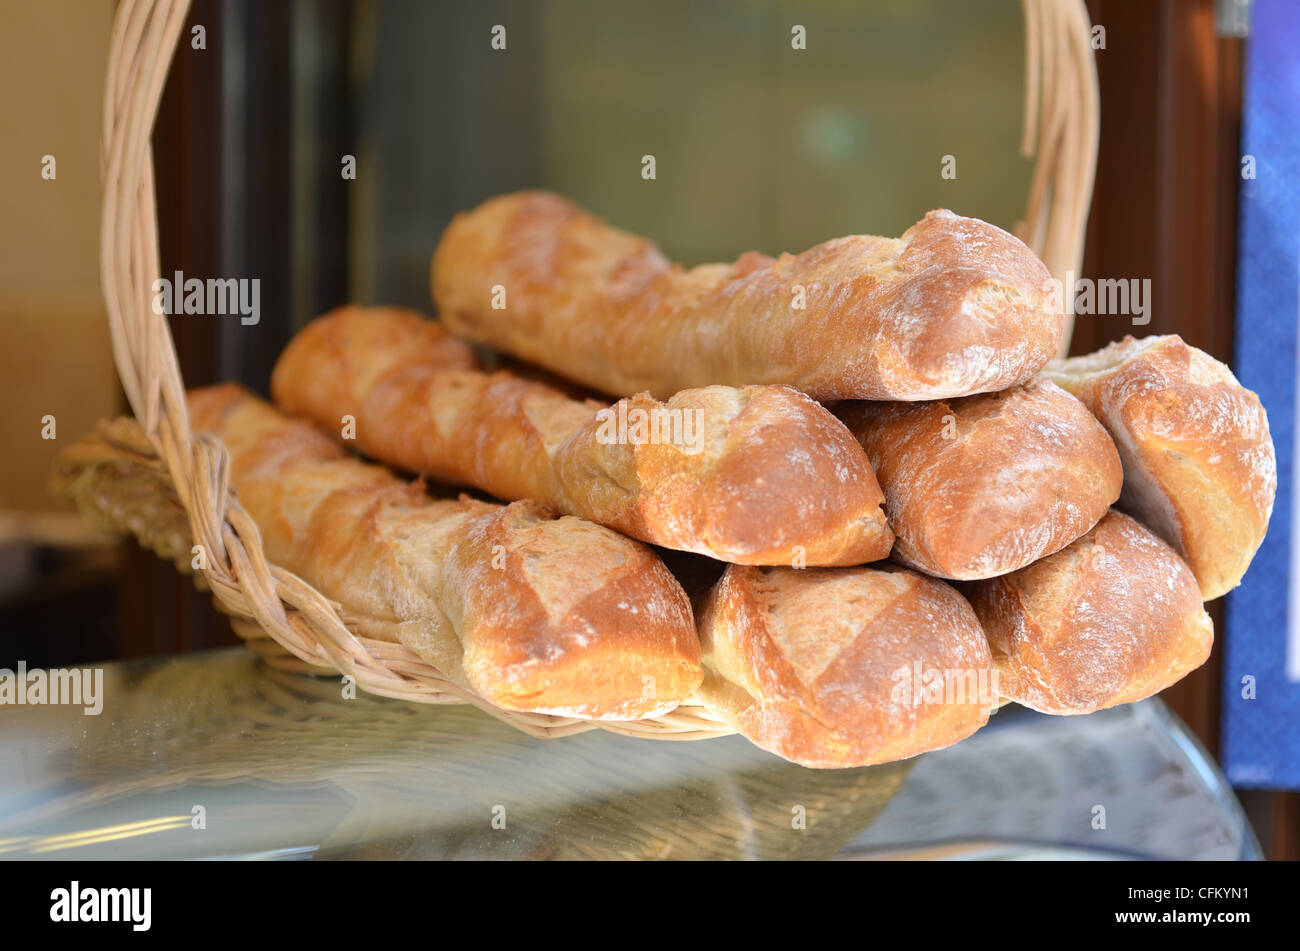 A basket of French bread baguettes for sale - shallow depth of field. Stock Photo